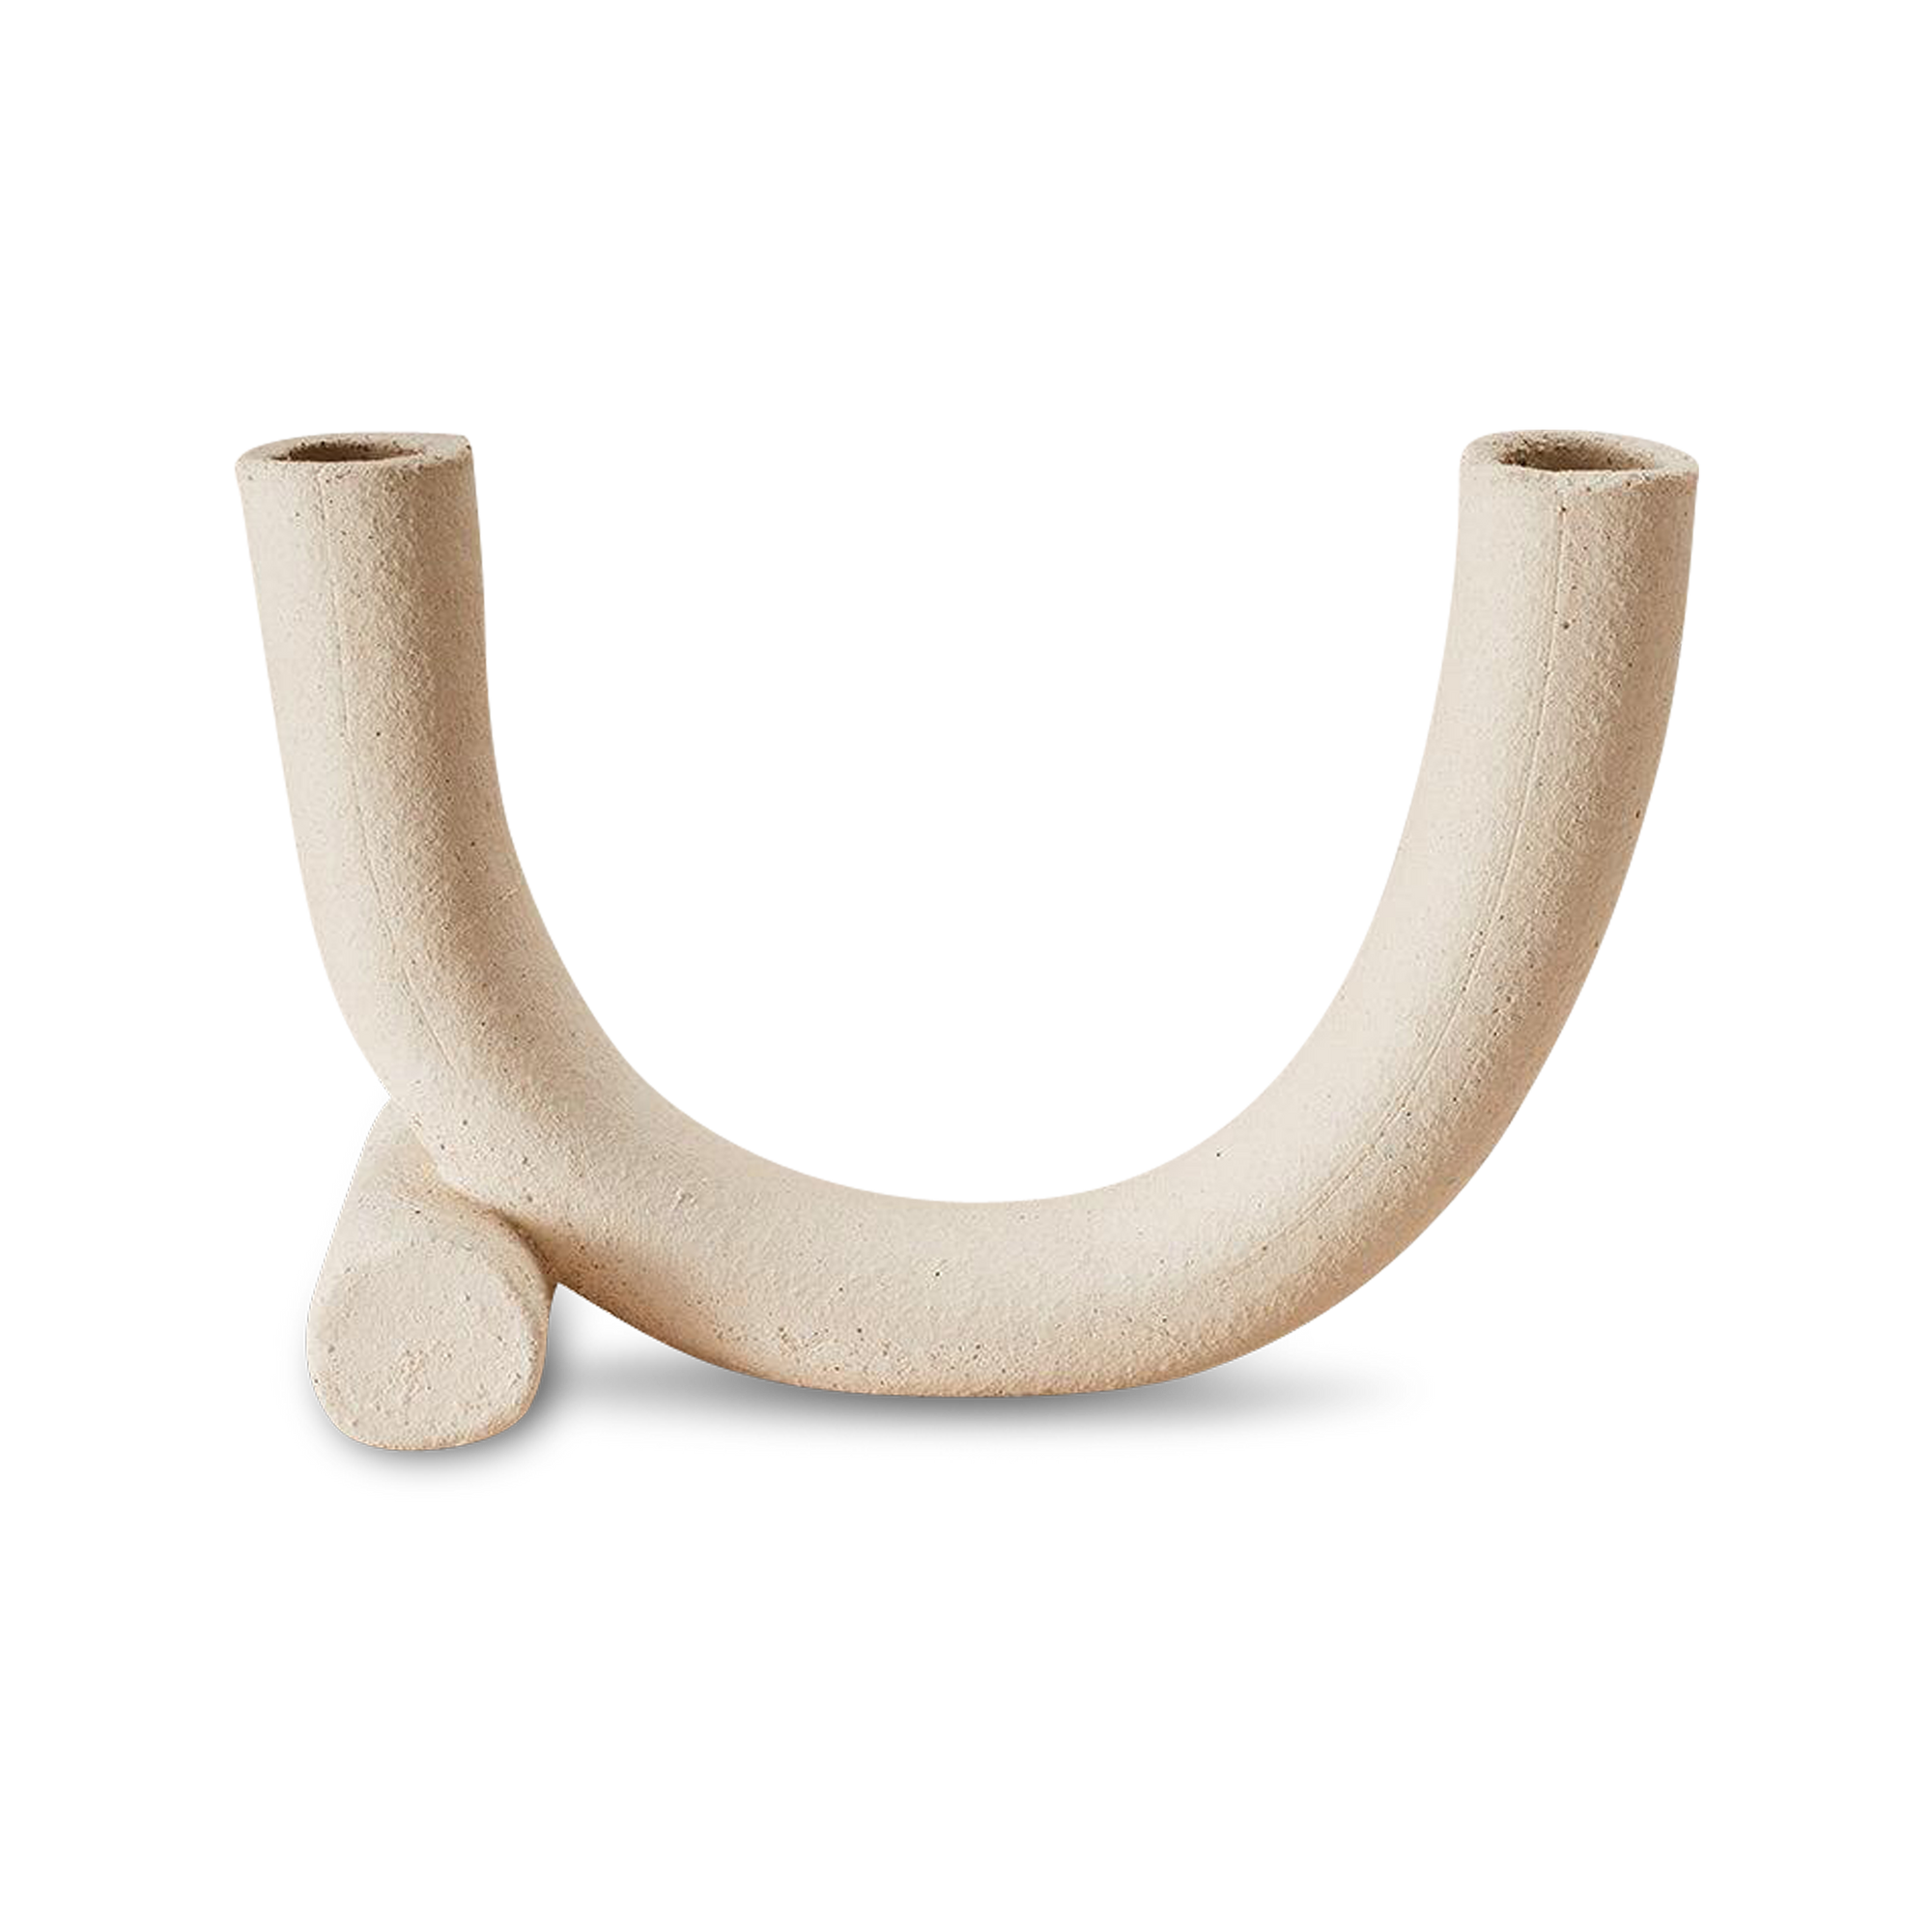 Crafted in raw ceramic, this candleholder can stand alone or intertwine with the Forevermore Dual Candleholder.